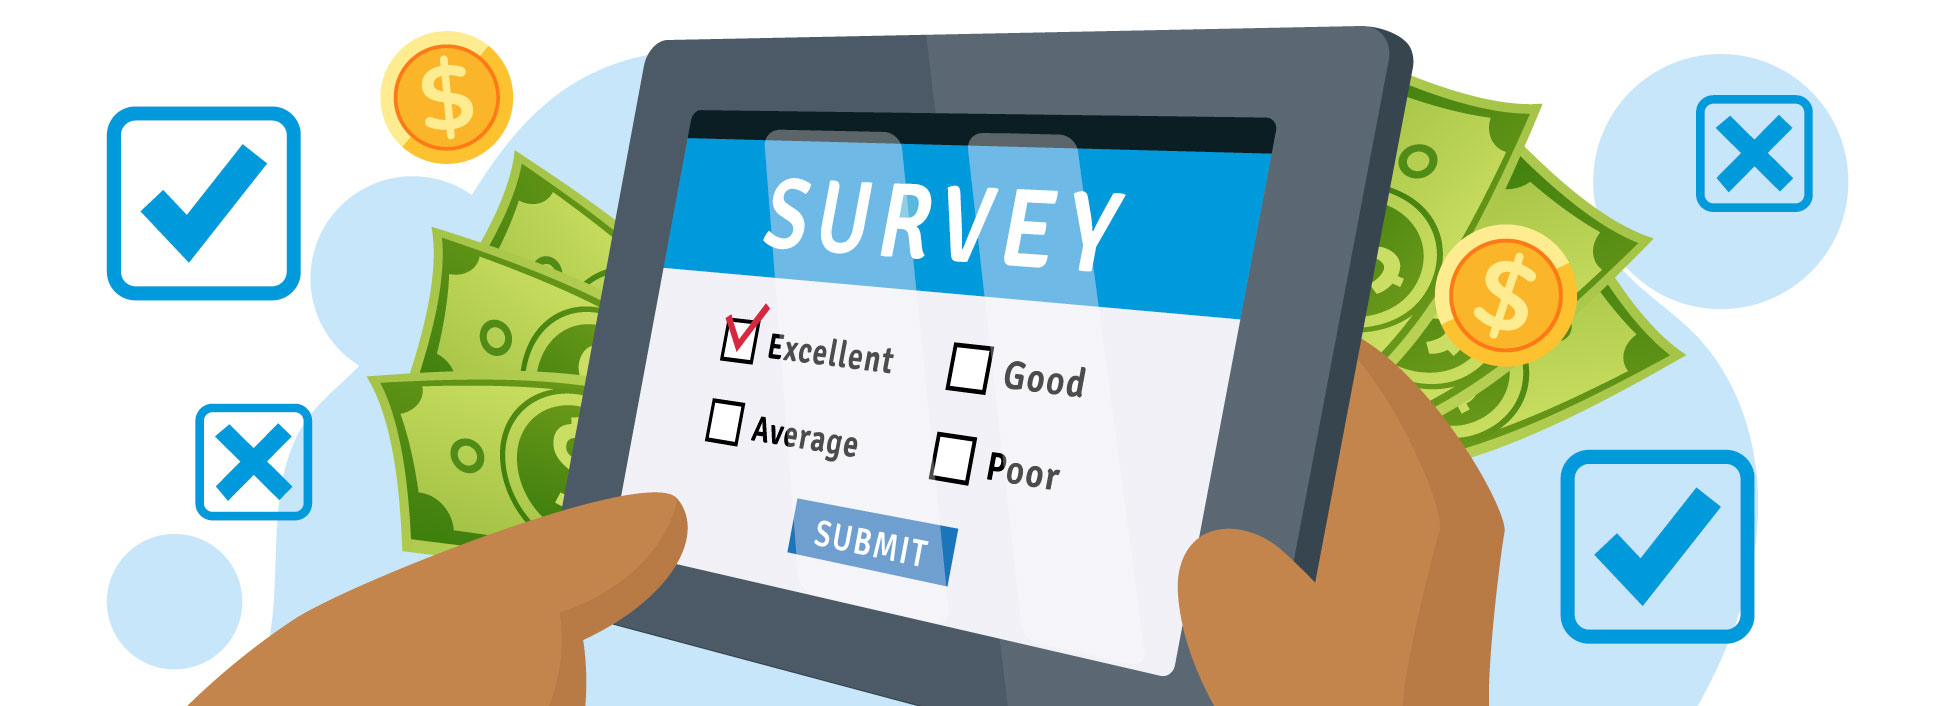 13 Best Paid Survey Apps: How To Make Money Fast & Easy